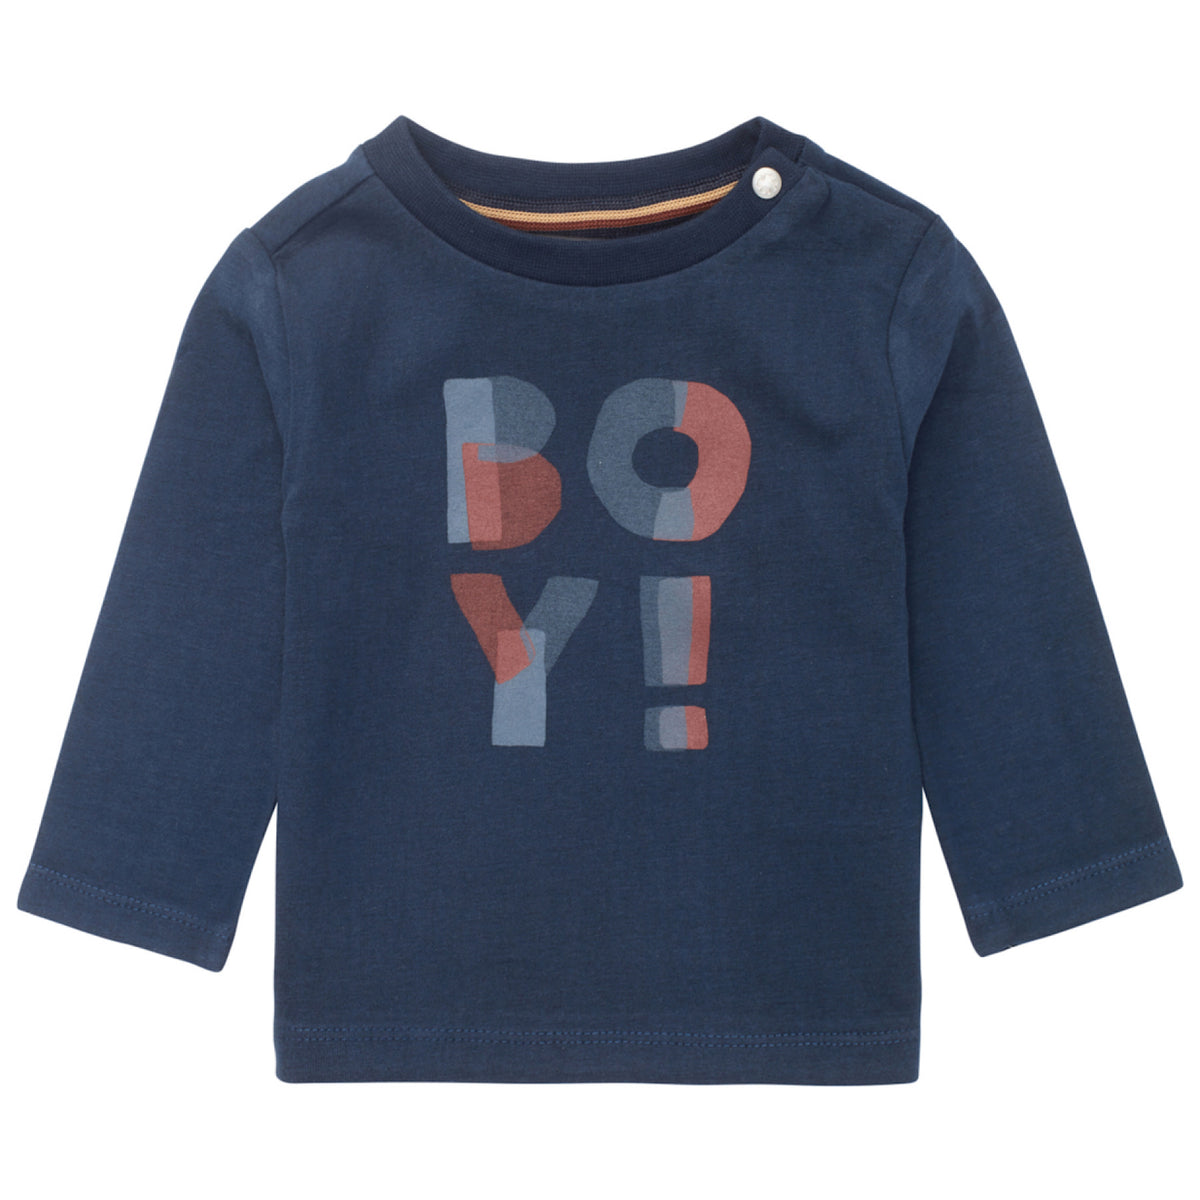 Long Sleeve Tee with BOY! Graphic